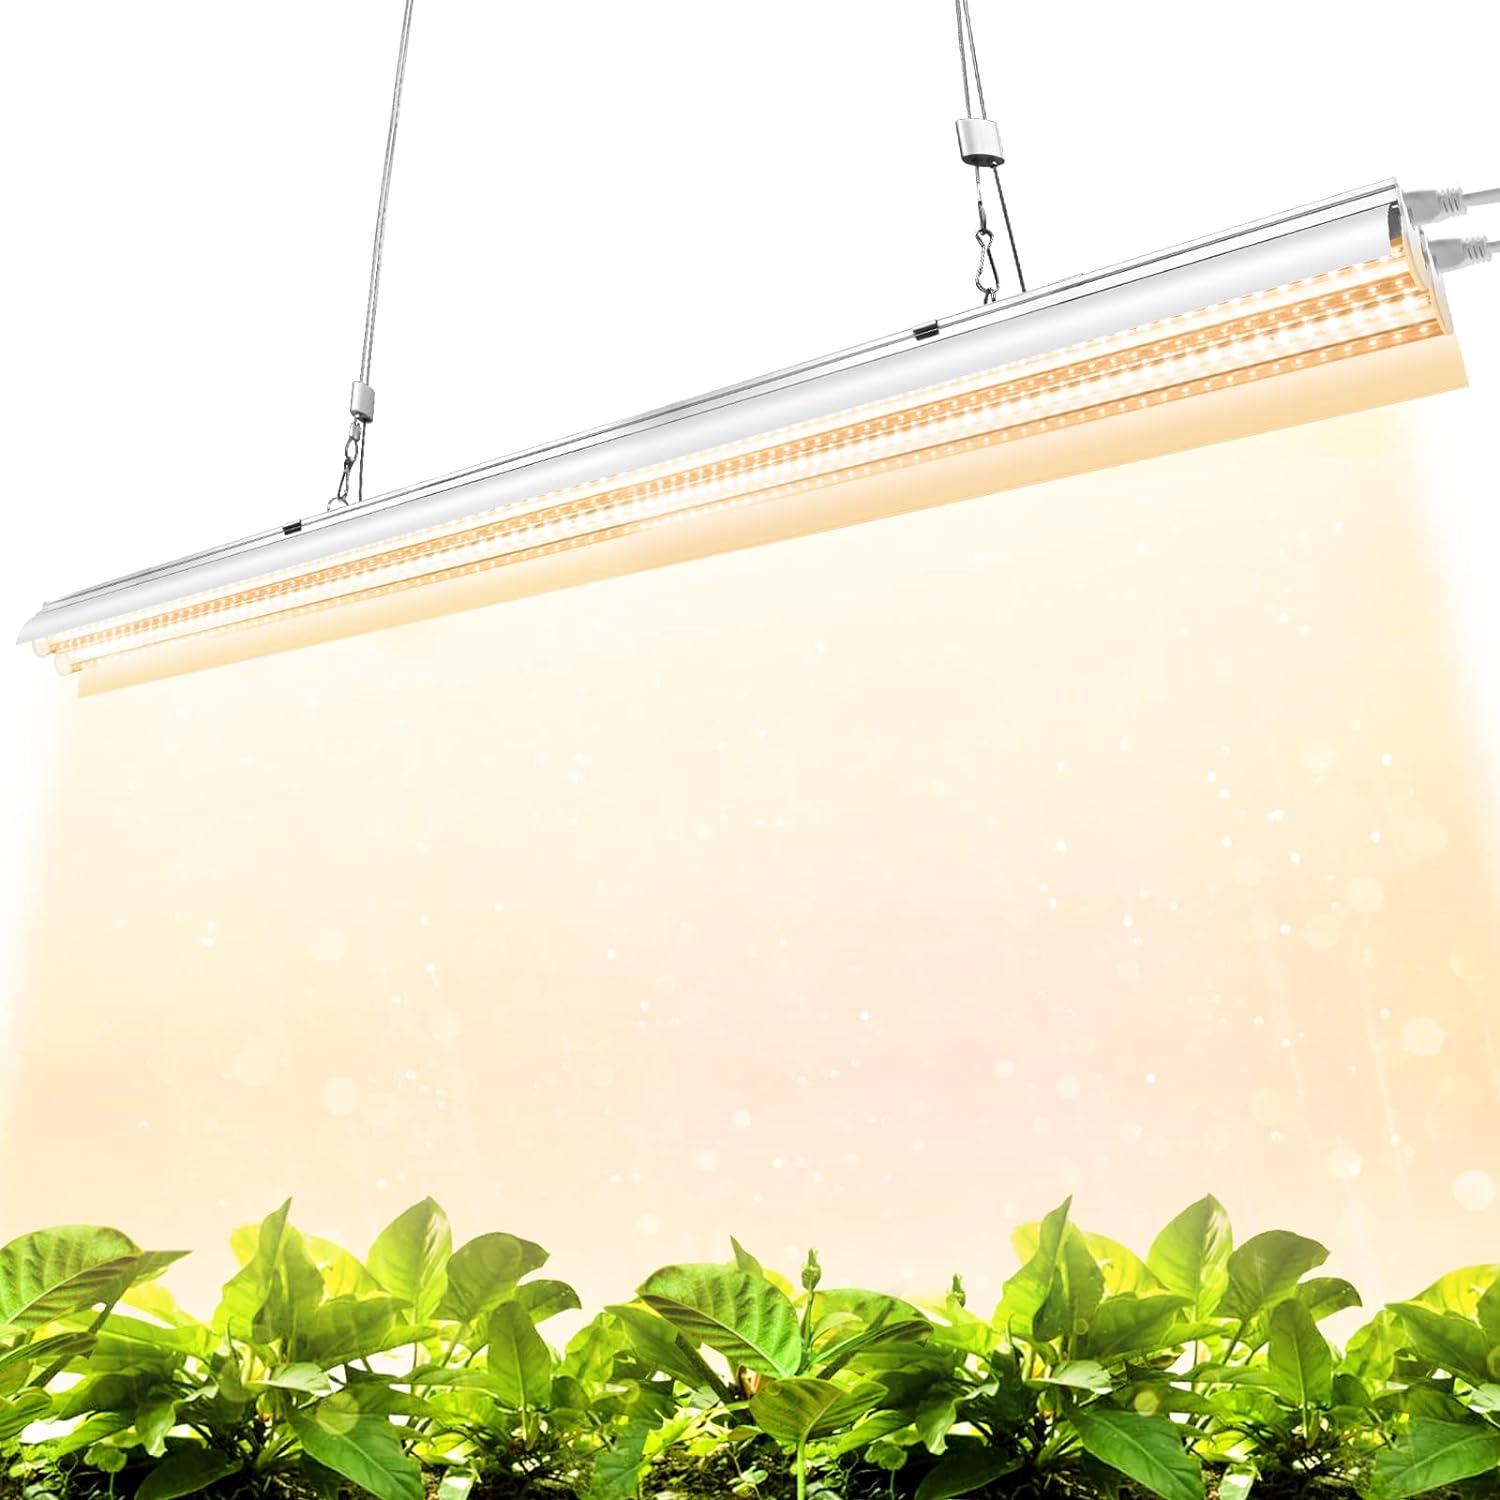 As a gardening enthusiast, I have always been on the lookout for innovative ways to bring out my plants' full potential. When it comes to indoor plant care and hydroponics systems, lighting is crucial in replicating natural sunlight conditions that promote growth, seedling development, flowering or blooming stages of various species. Thats why I was excited when Monios-L T5 LED Grow Light crossed my path!After owning the product for many months now and using it consistently on a daily basis wit